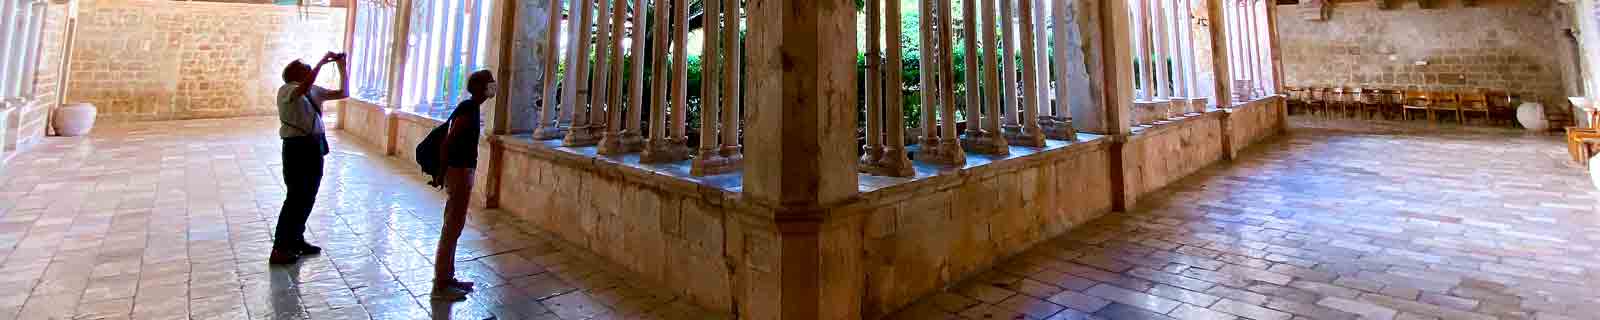 Photo of the Franciscan Monastery Cloister in Dubrovnik